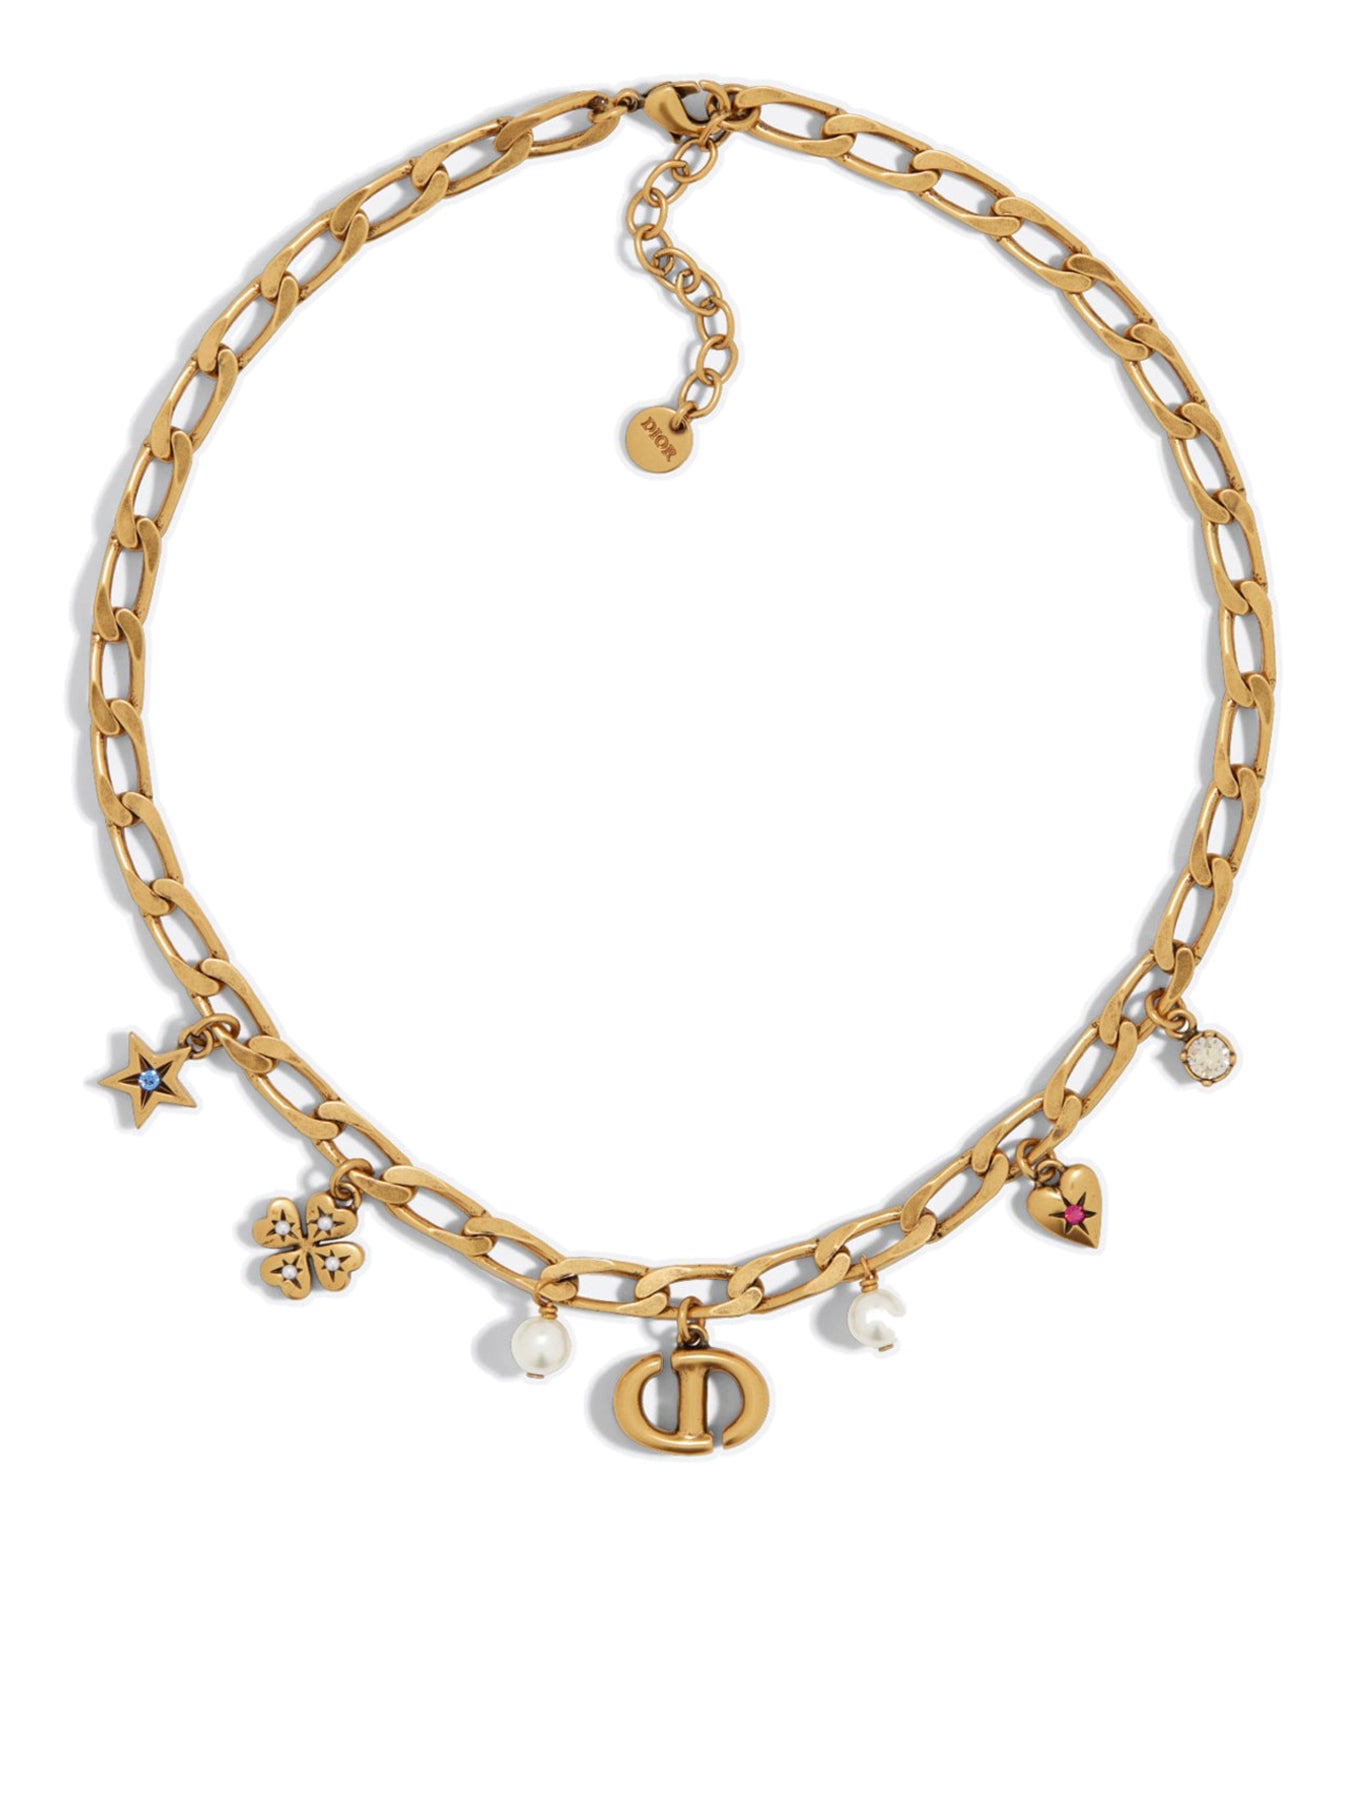 Dior Lucky Charms necklace